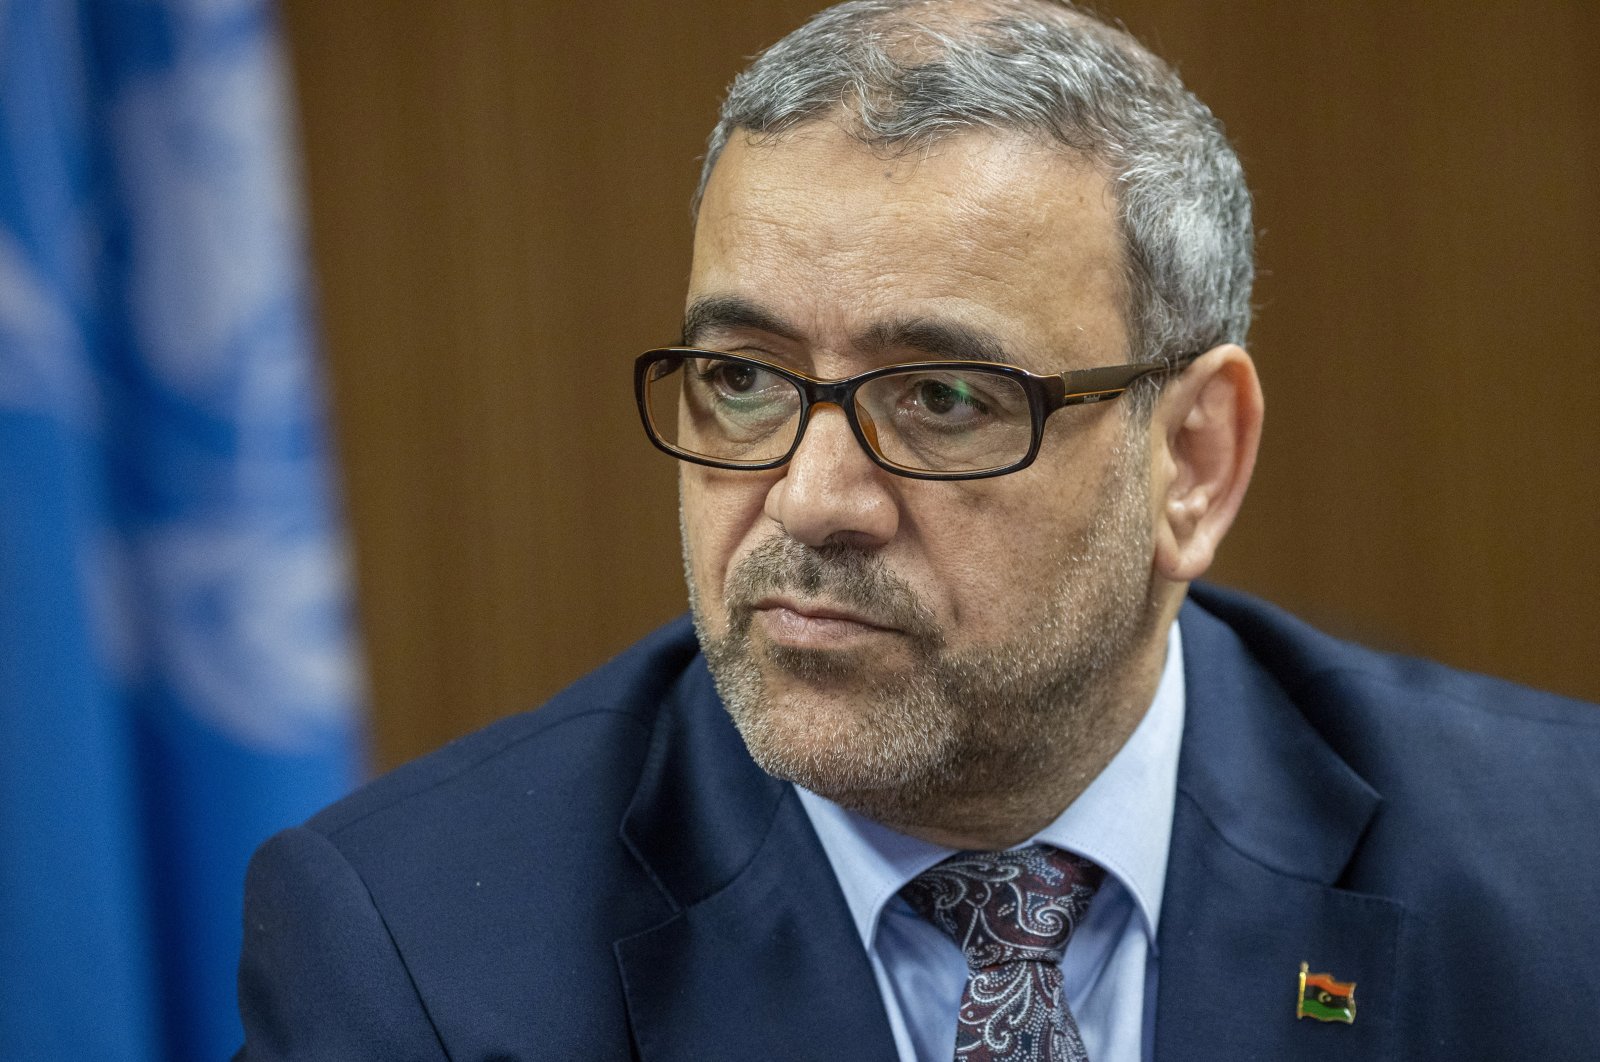 President of the High State Council of State (HSC) Khalid al-Mishri attends a high-level meeting on the Libyan Constitutional Track at the United Nations in Geneva, Switzerland, June 28, 2022. (Reuters File Photo)